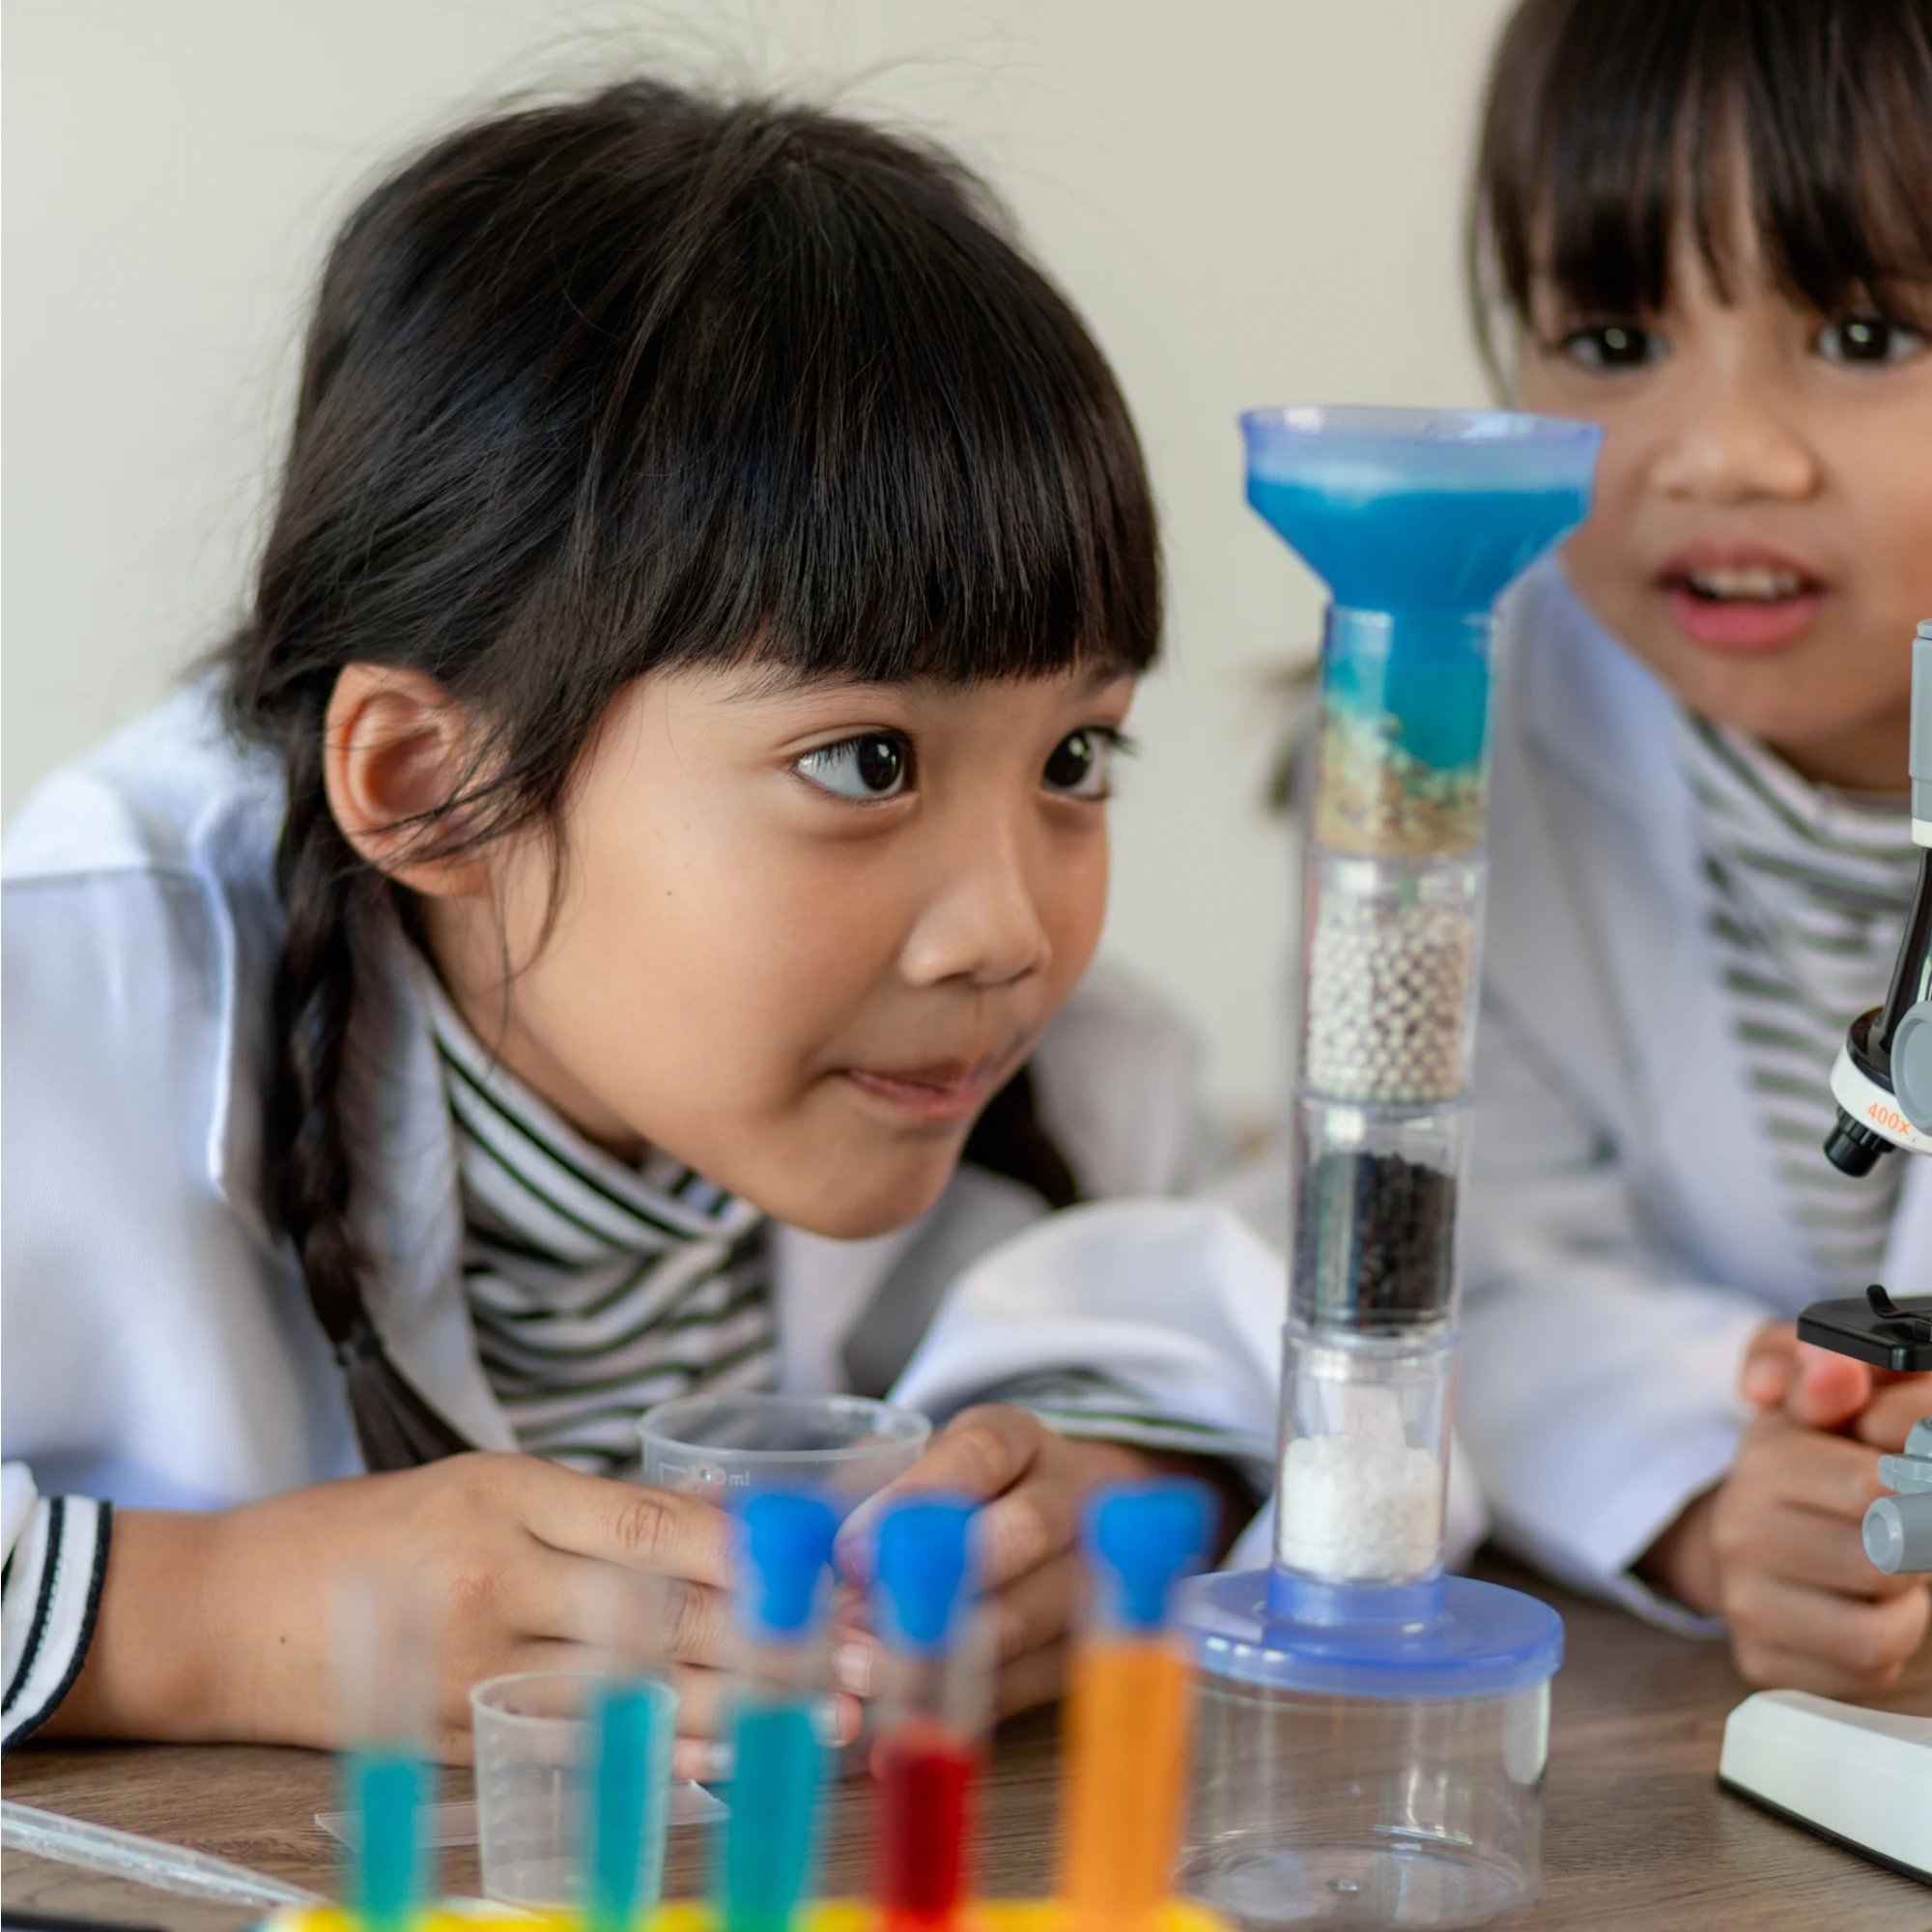 a young girl working on a science experiment